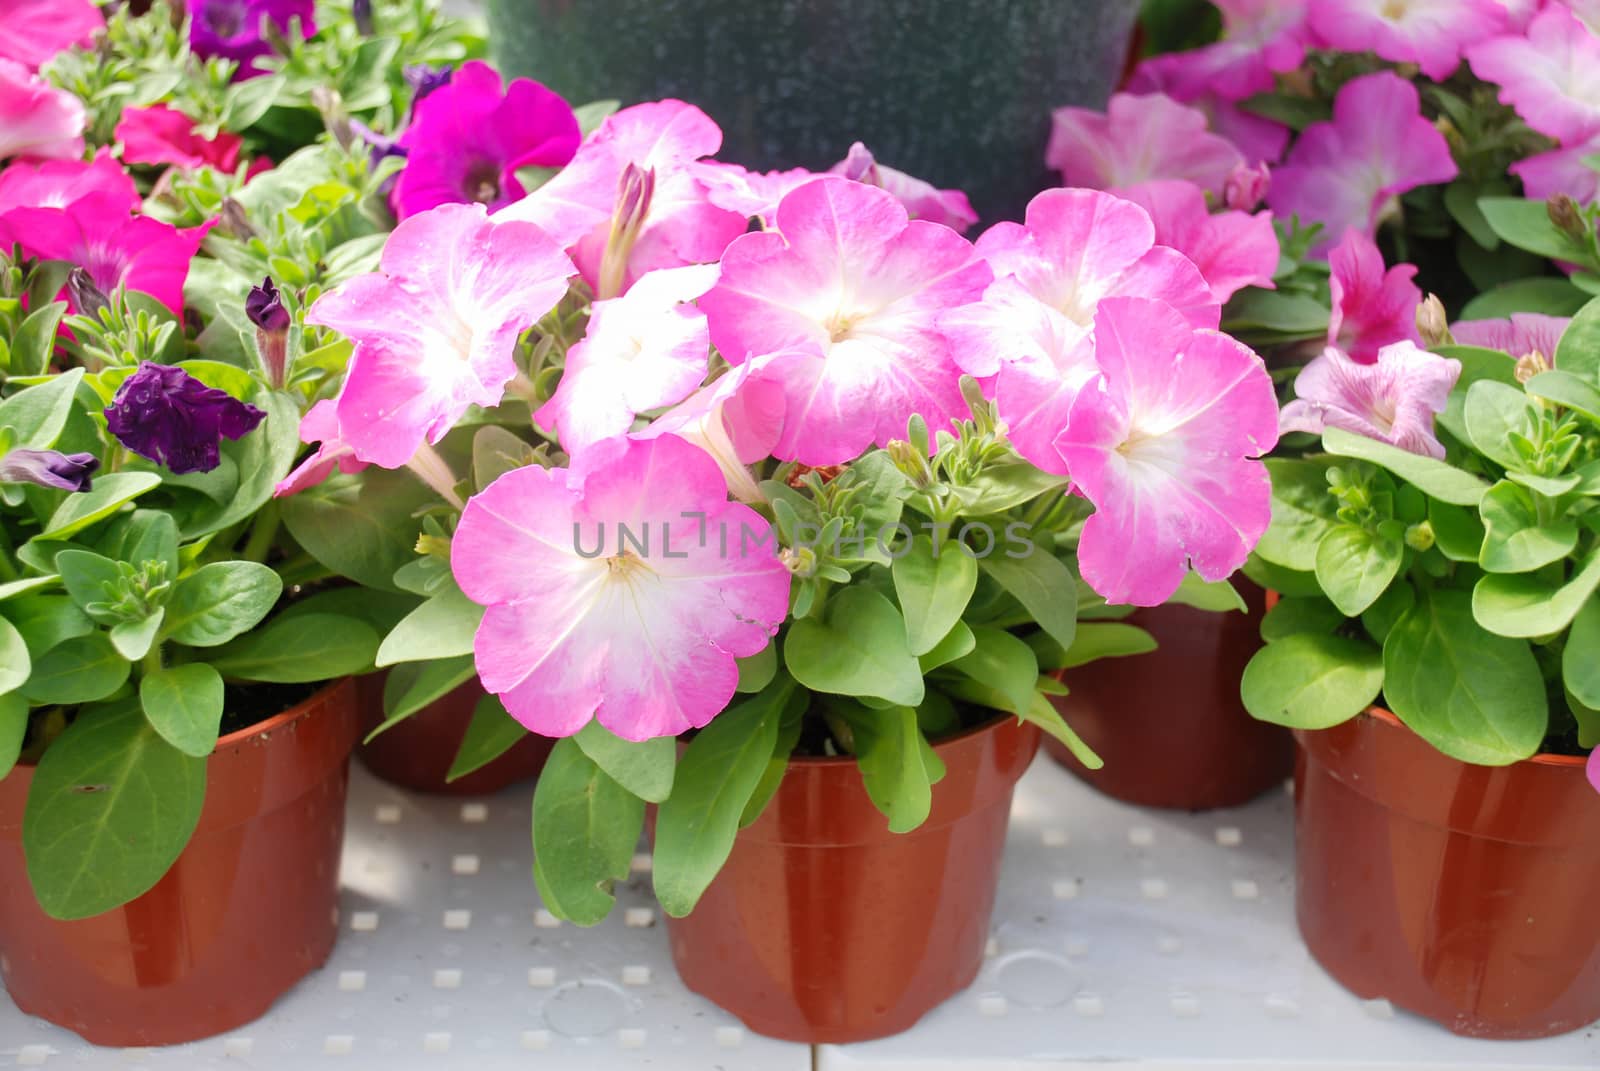 Petunia ,Petunias in the tray,Petunia in the pot, pink shade  by yuiyuize